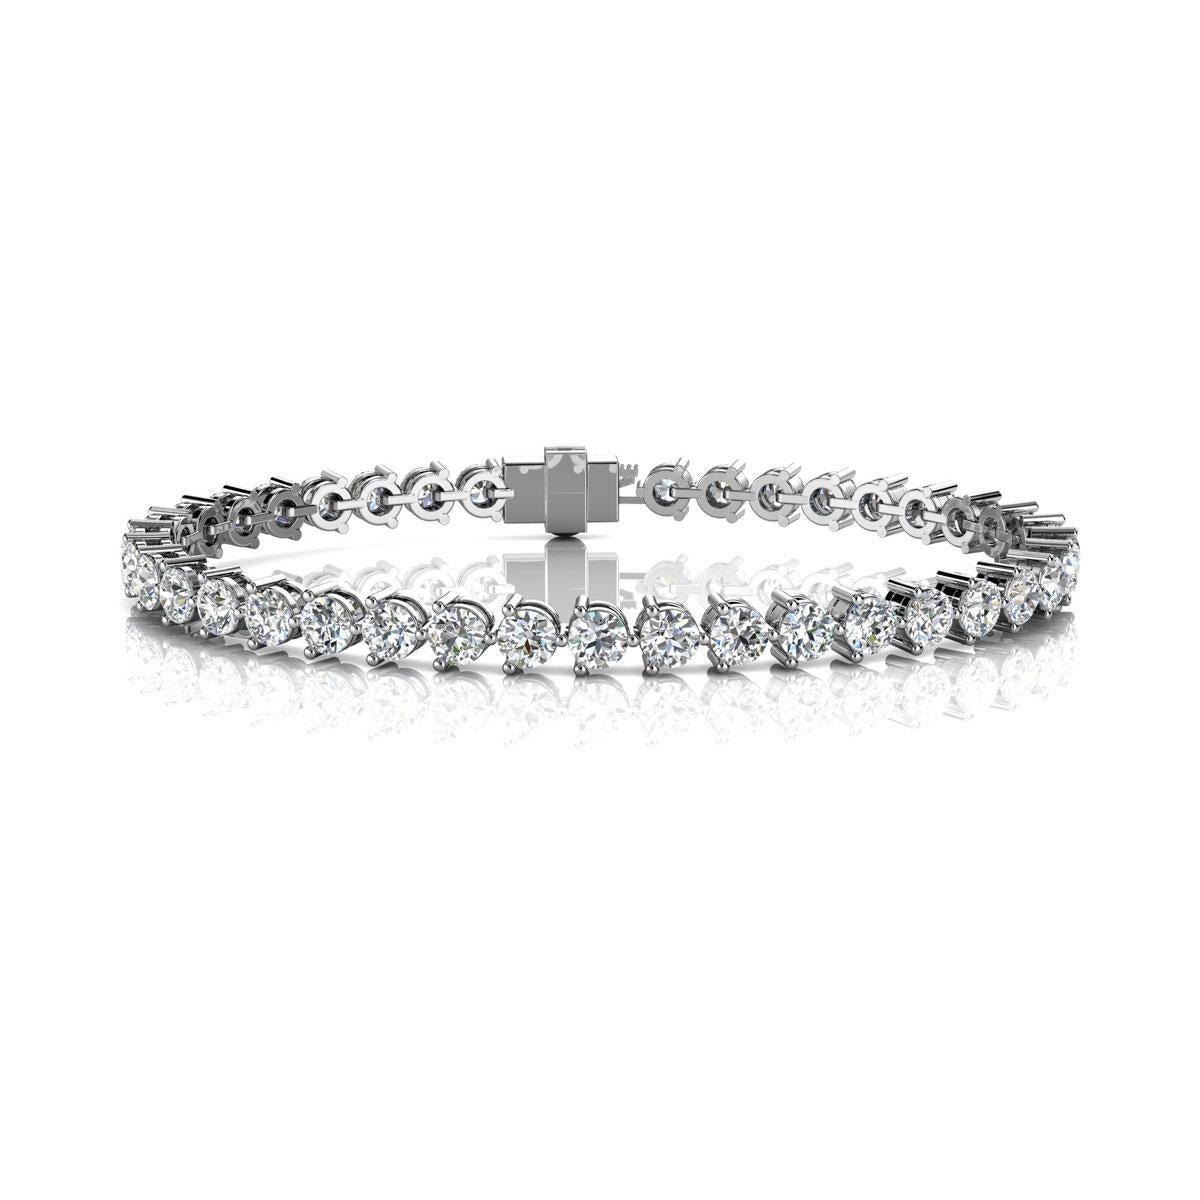 A timeless three prongs diamonds tennis bracelet. Experience the Difference!

Product details: 

Center Gemstone Type: NATURAL DIAMOND
Center Gemstone Color: WHITE
Center Gemstone Shape: ROUND
Center Diamond Carat Weight: 7
Metal: 18K White